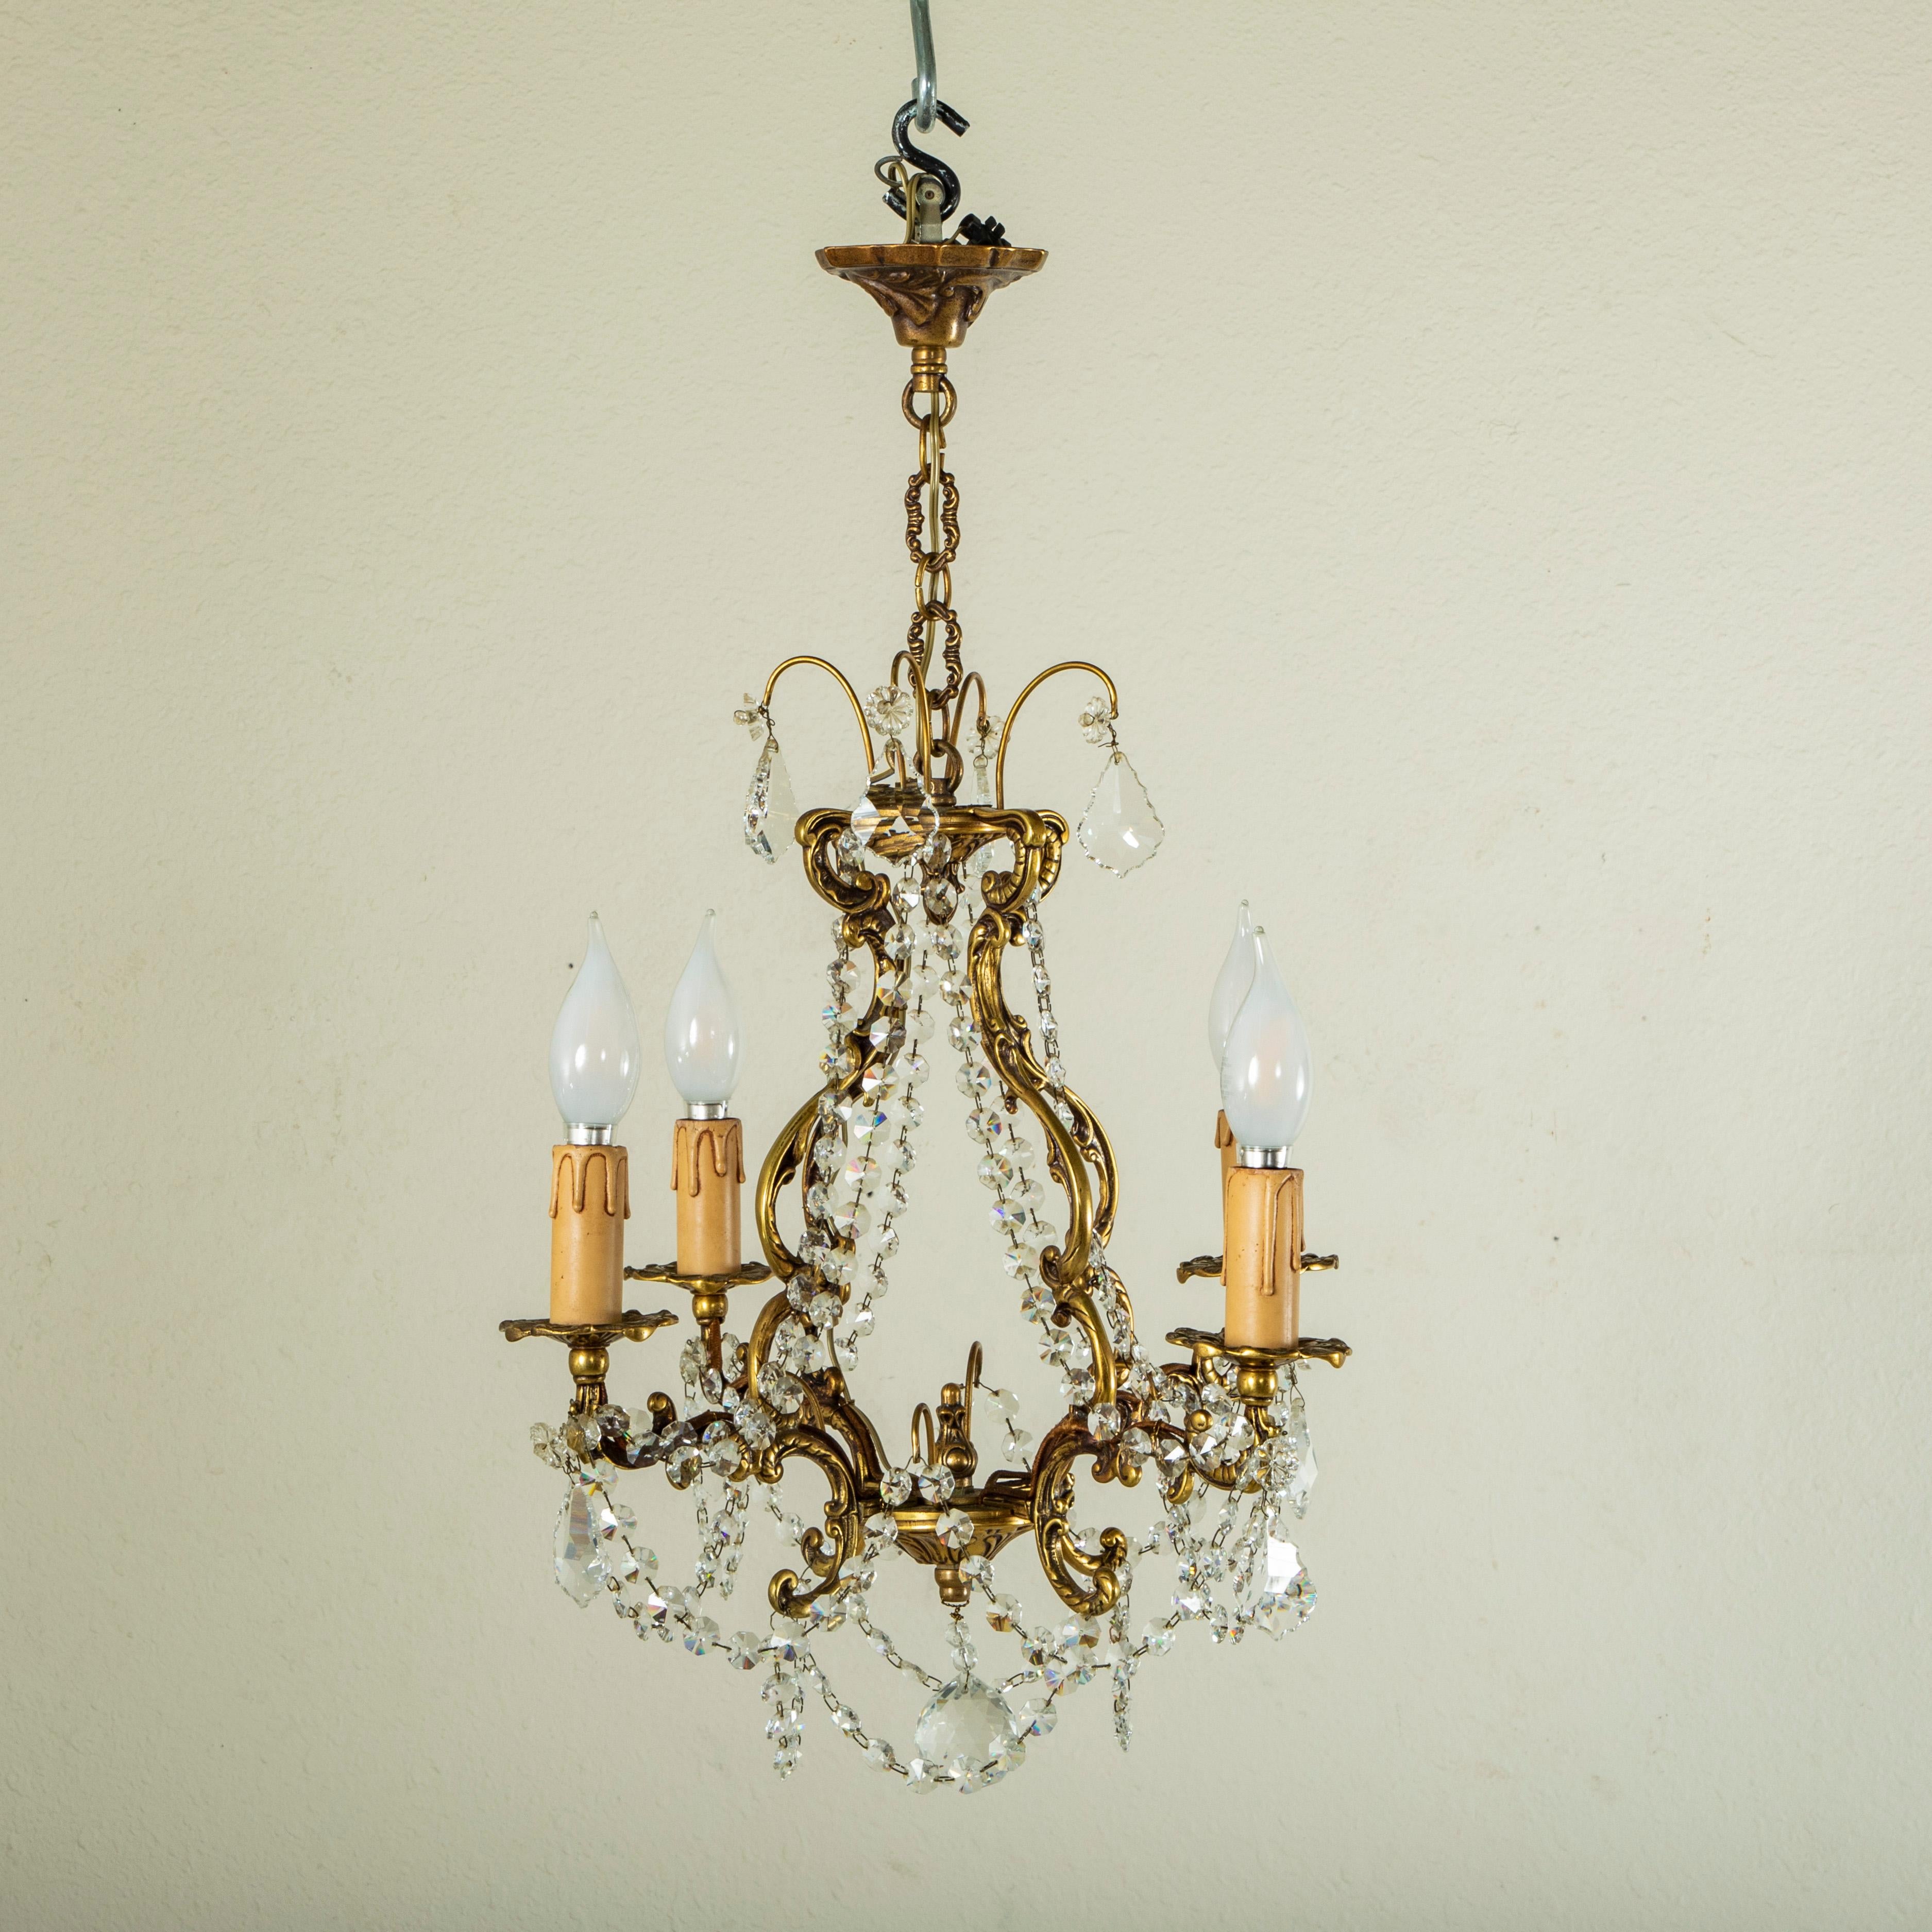 Early 20th Century Small Scale French Bronze and Strass Crystal Chandelier In Good Condition For Sale In Fayetteville, AR